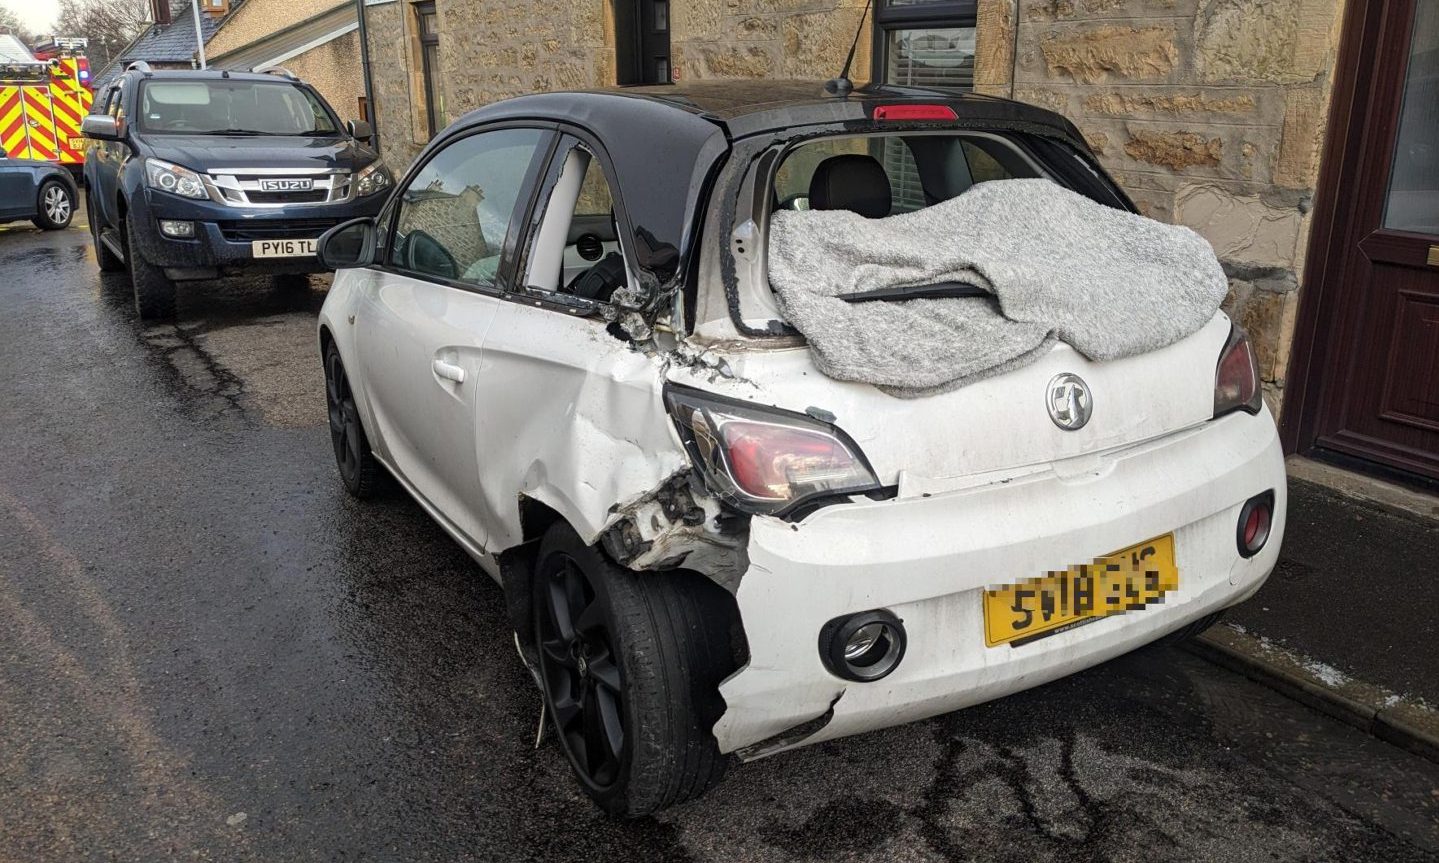 A white Vauxhall sustained damage during the crash